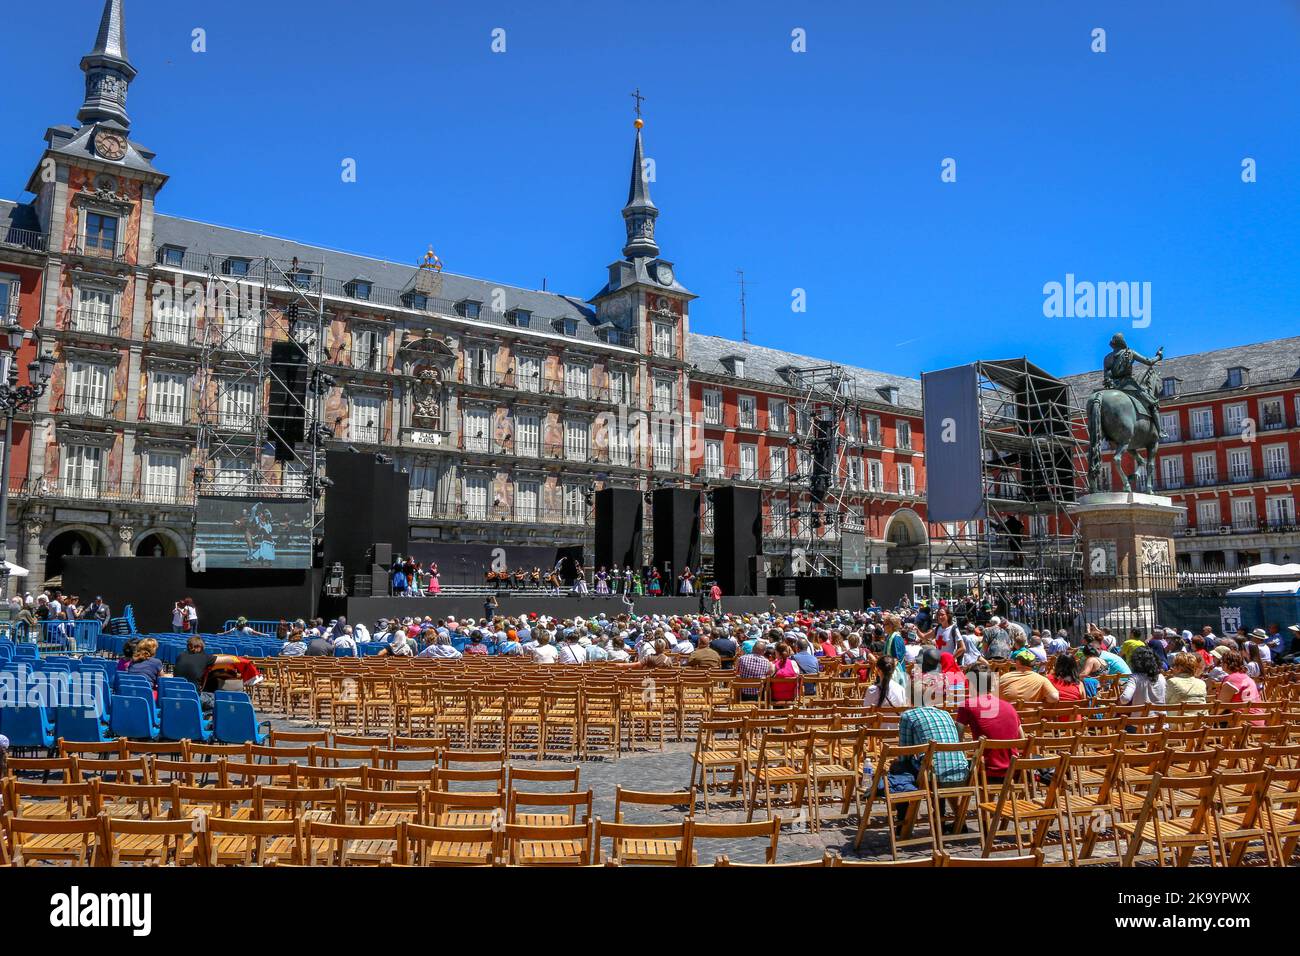 Performance at the Plaza Mayor in the city of Madrid, Spain Stock Photo